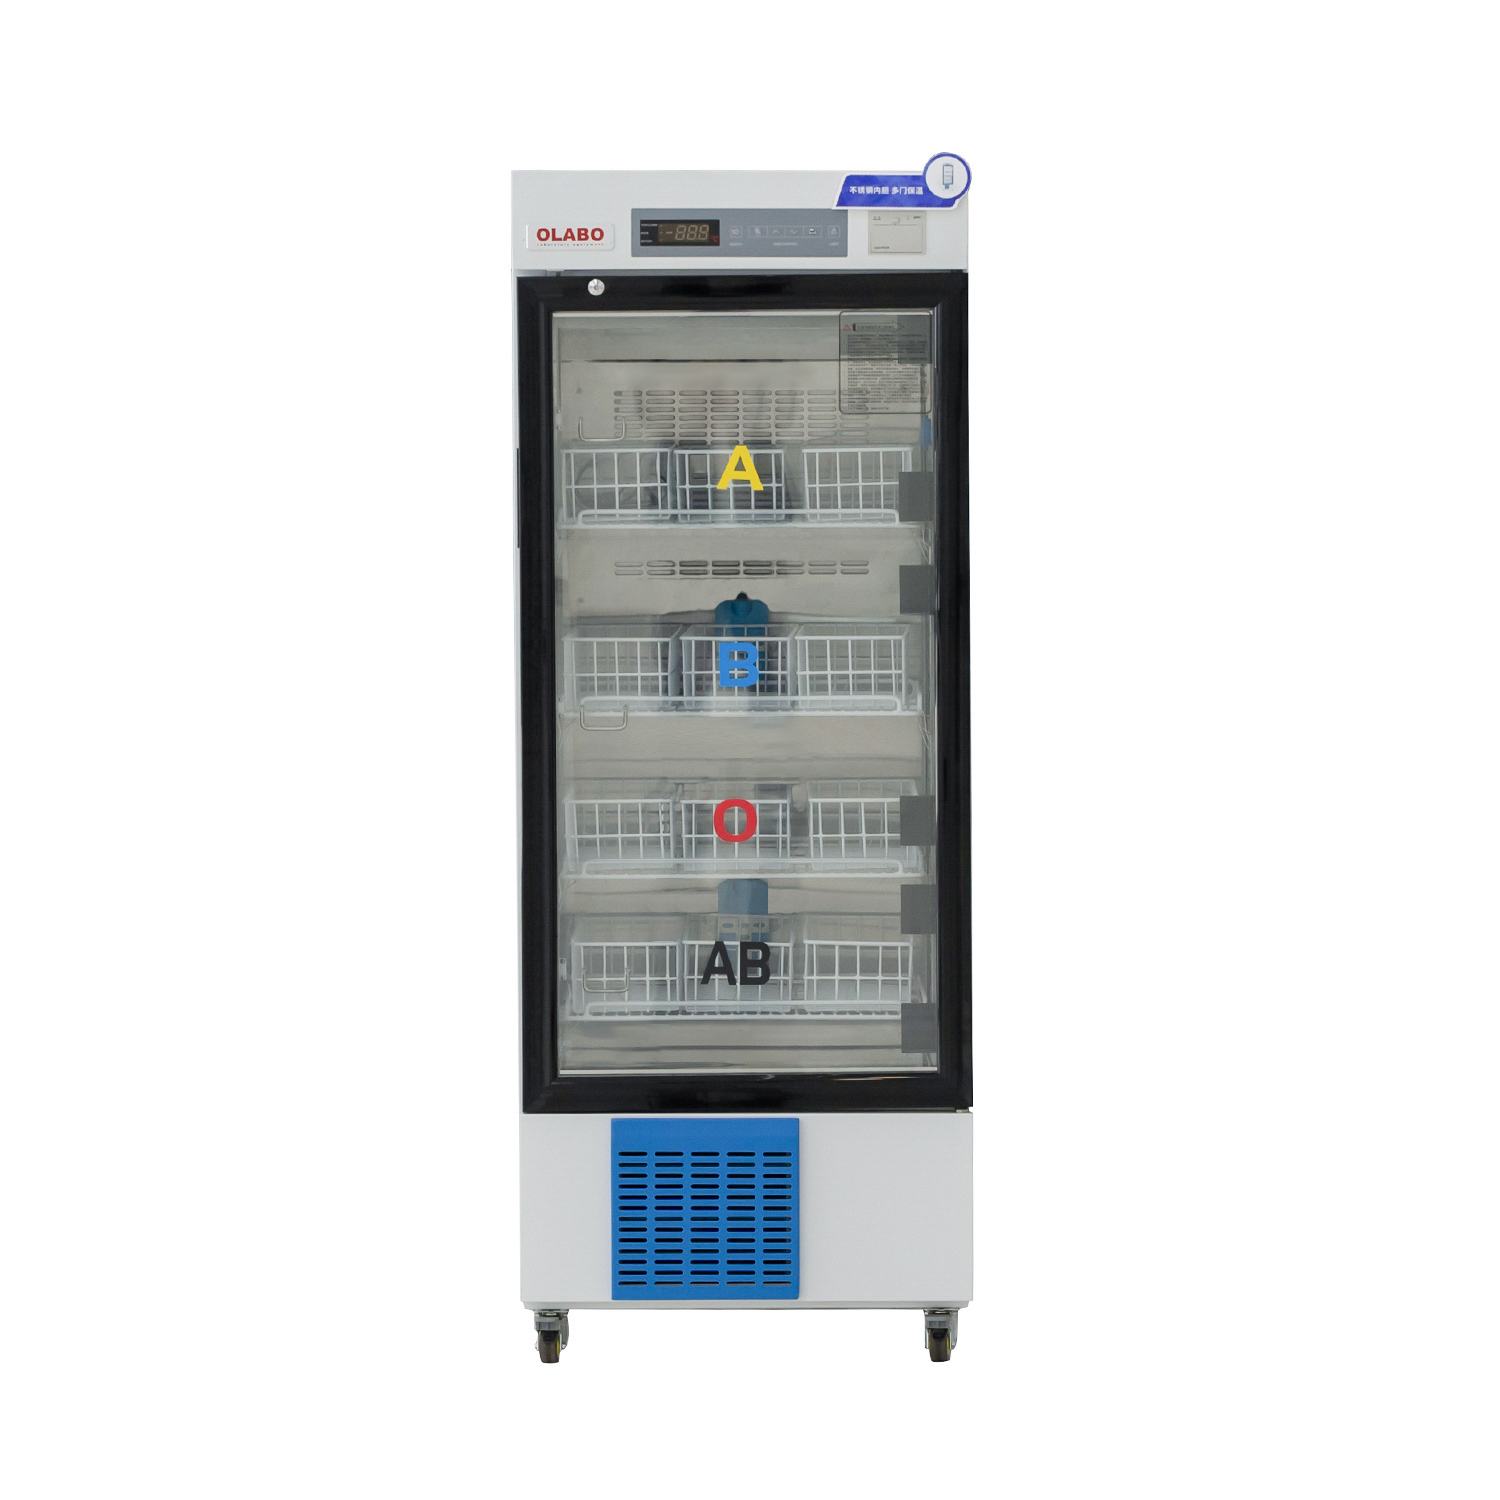 4 Degrees Celsius Blood Bank Refrigerator For Laboratory Featured Image